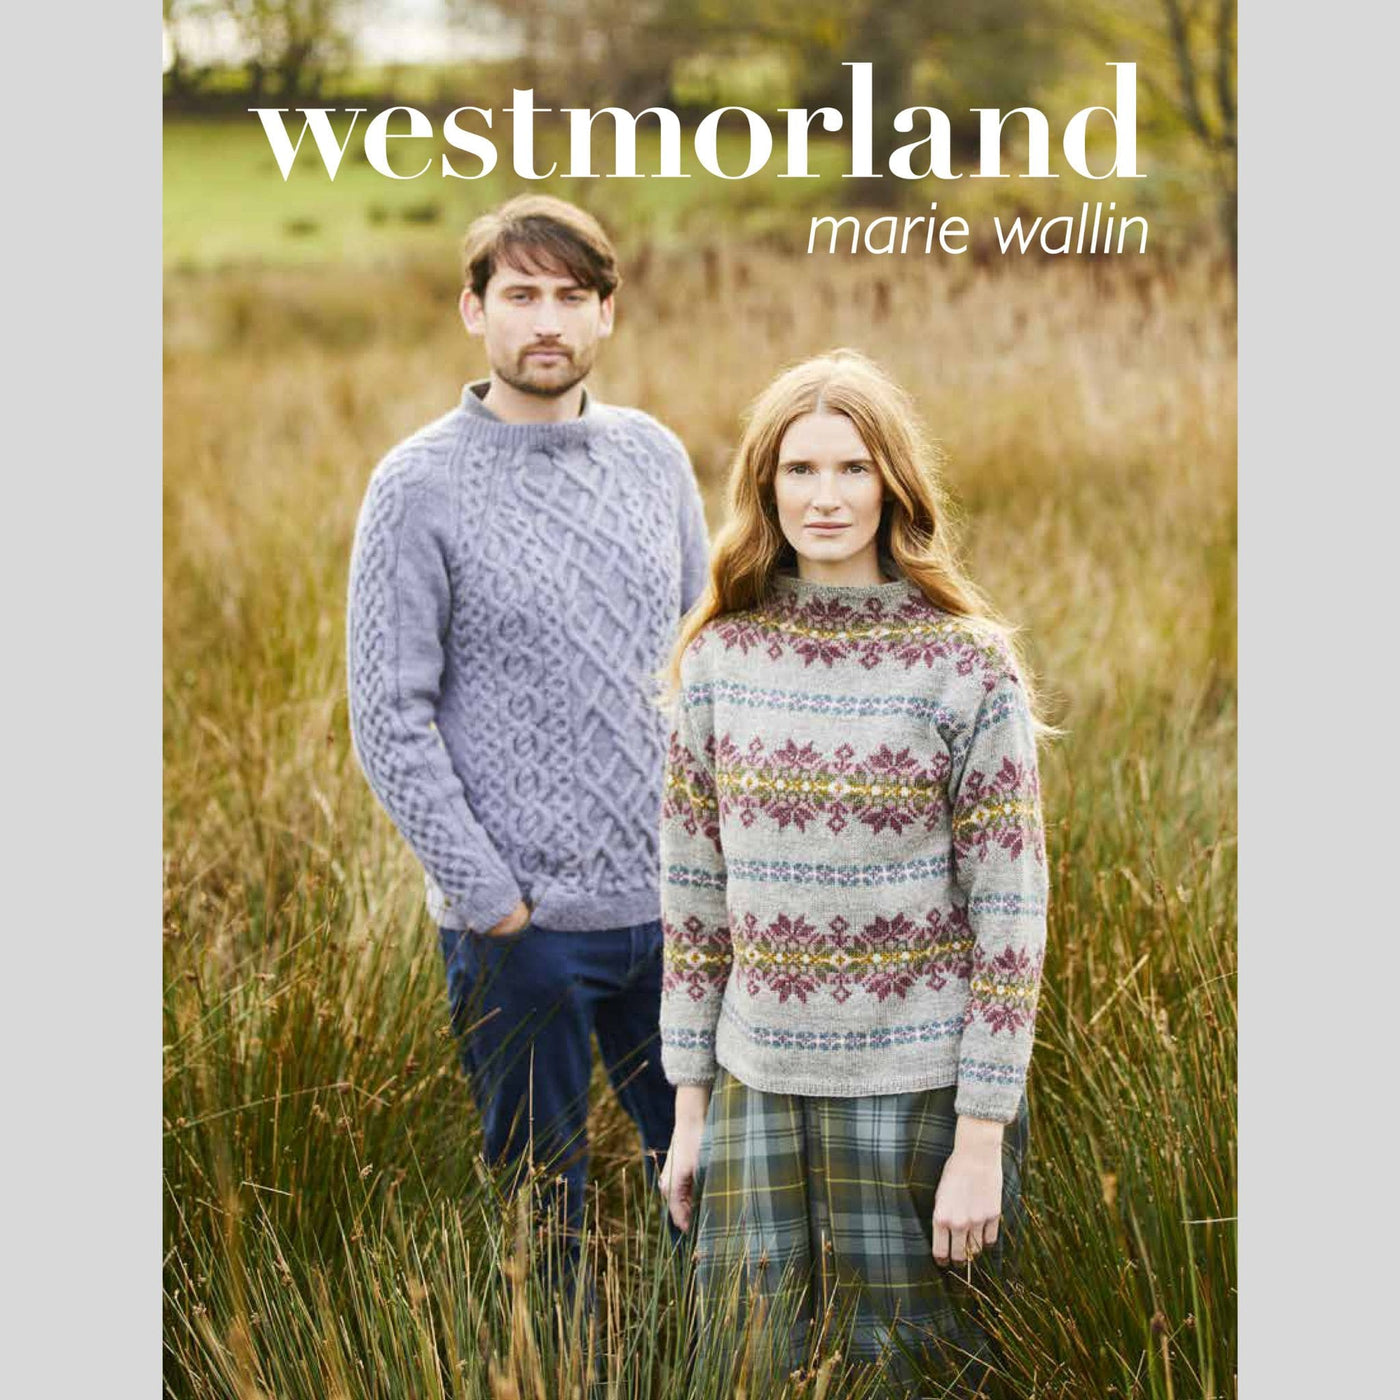 Front cover of Weslmorland: Marie Wallin book shows two models standing in grassy field. Male model wearing a textured grey pullover sweater and female wearing an allover colorwork pullover sweater.